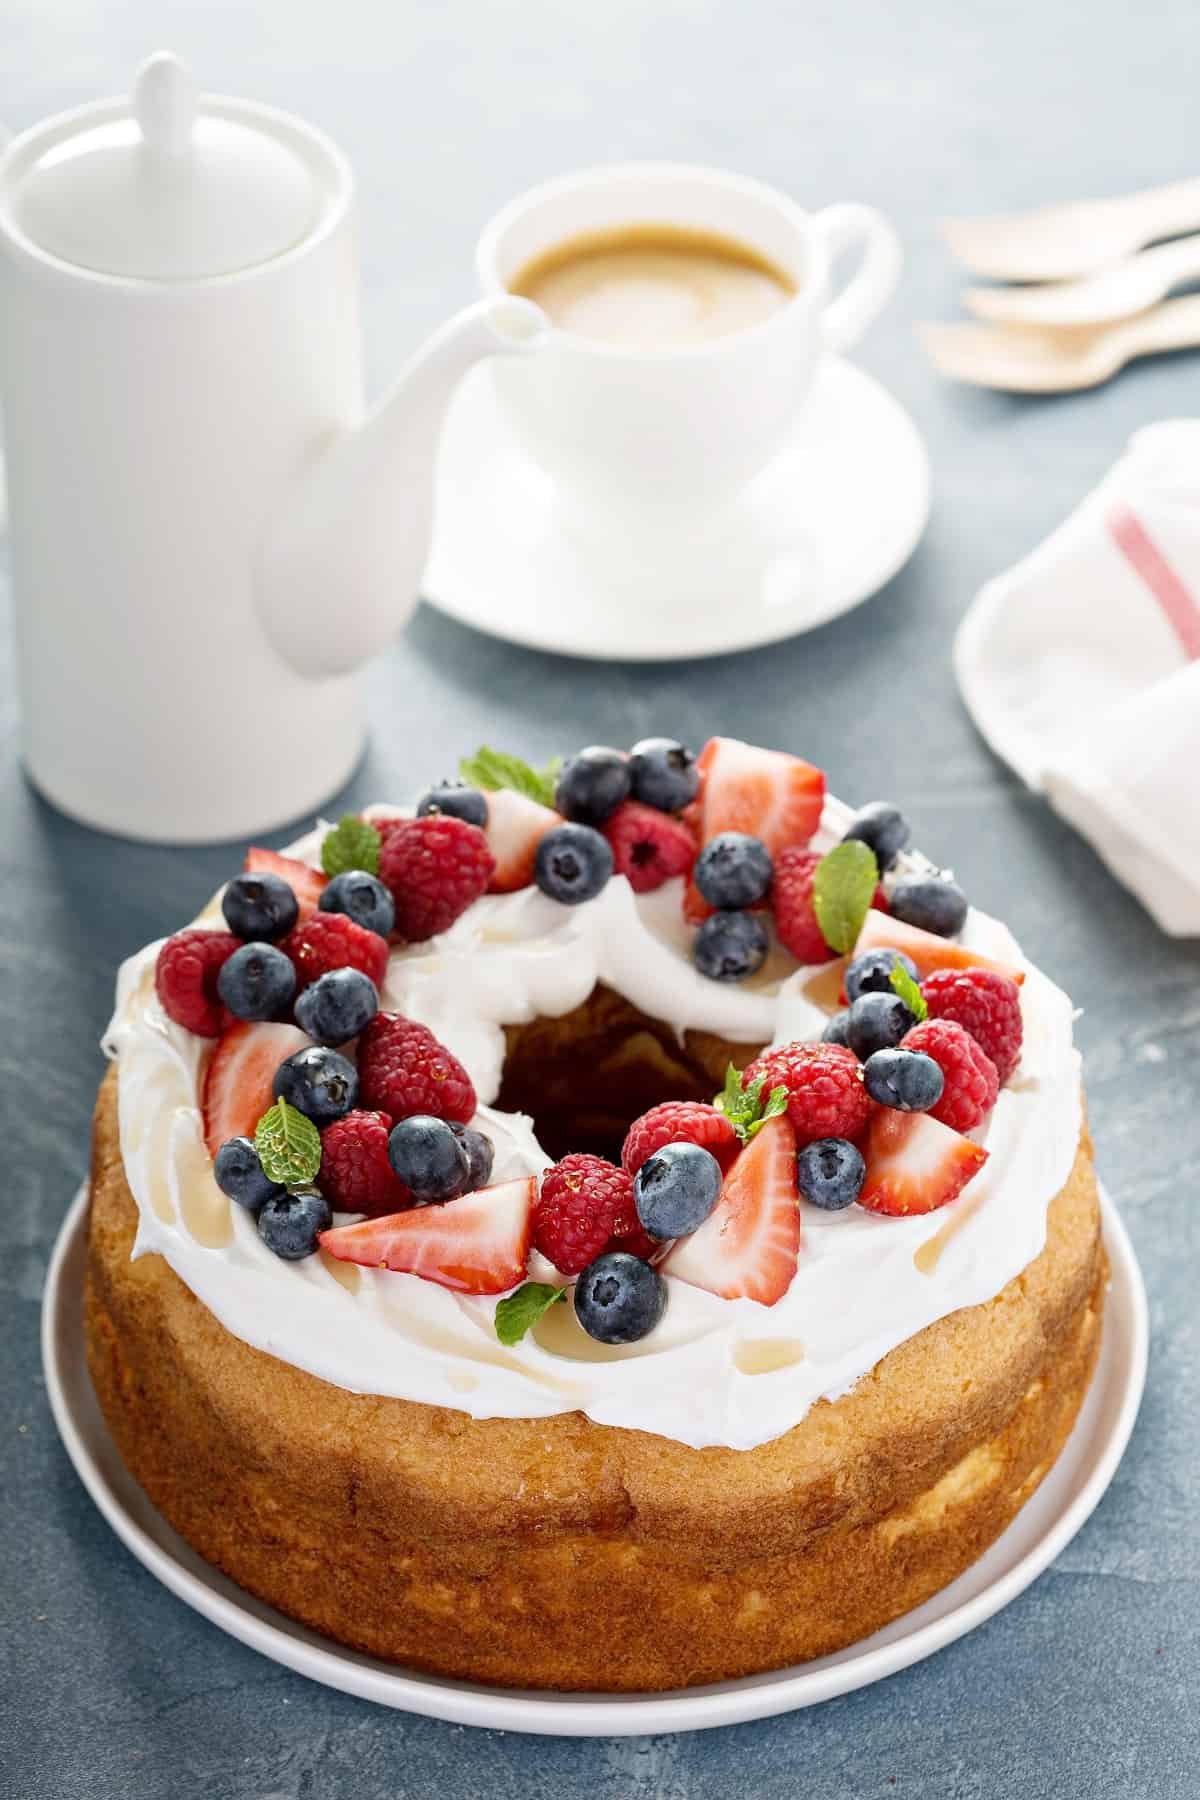 Cake with cream and fruit.